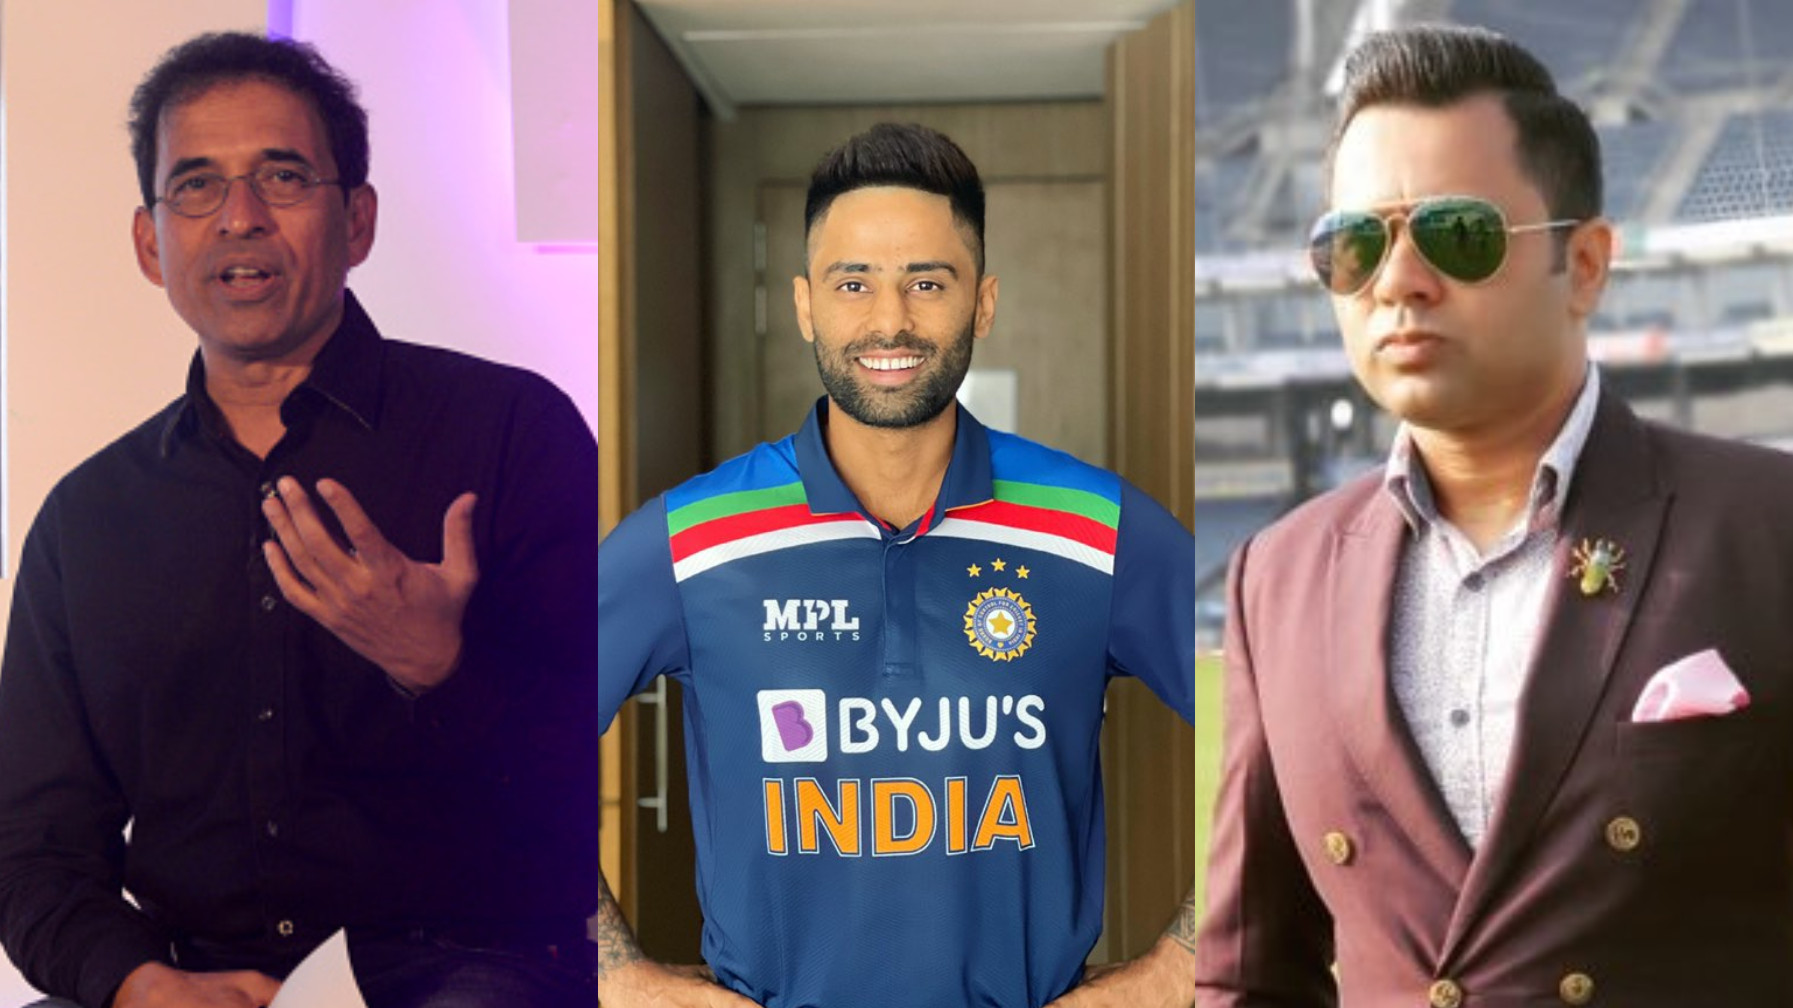 IND v ENG 2021: Experts, Fans react to Suryakumar Yadav's omission from Indian team for 3rd T20I